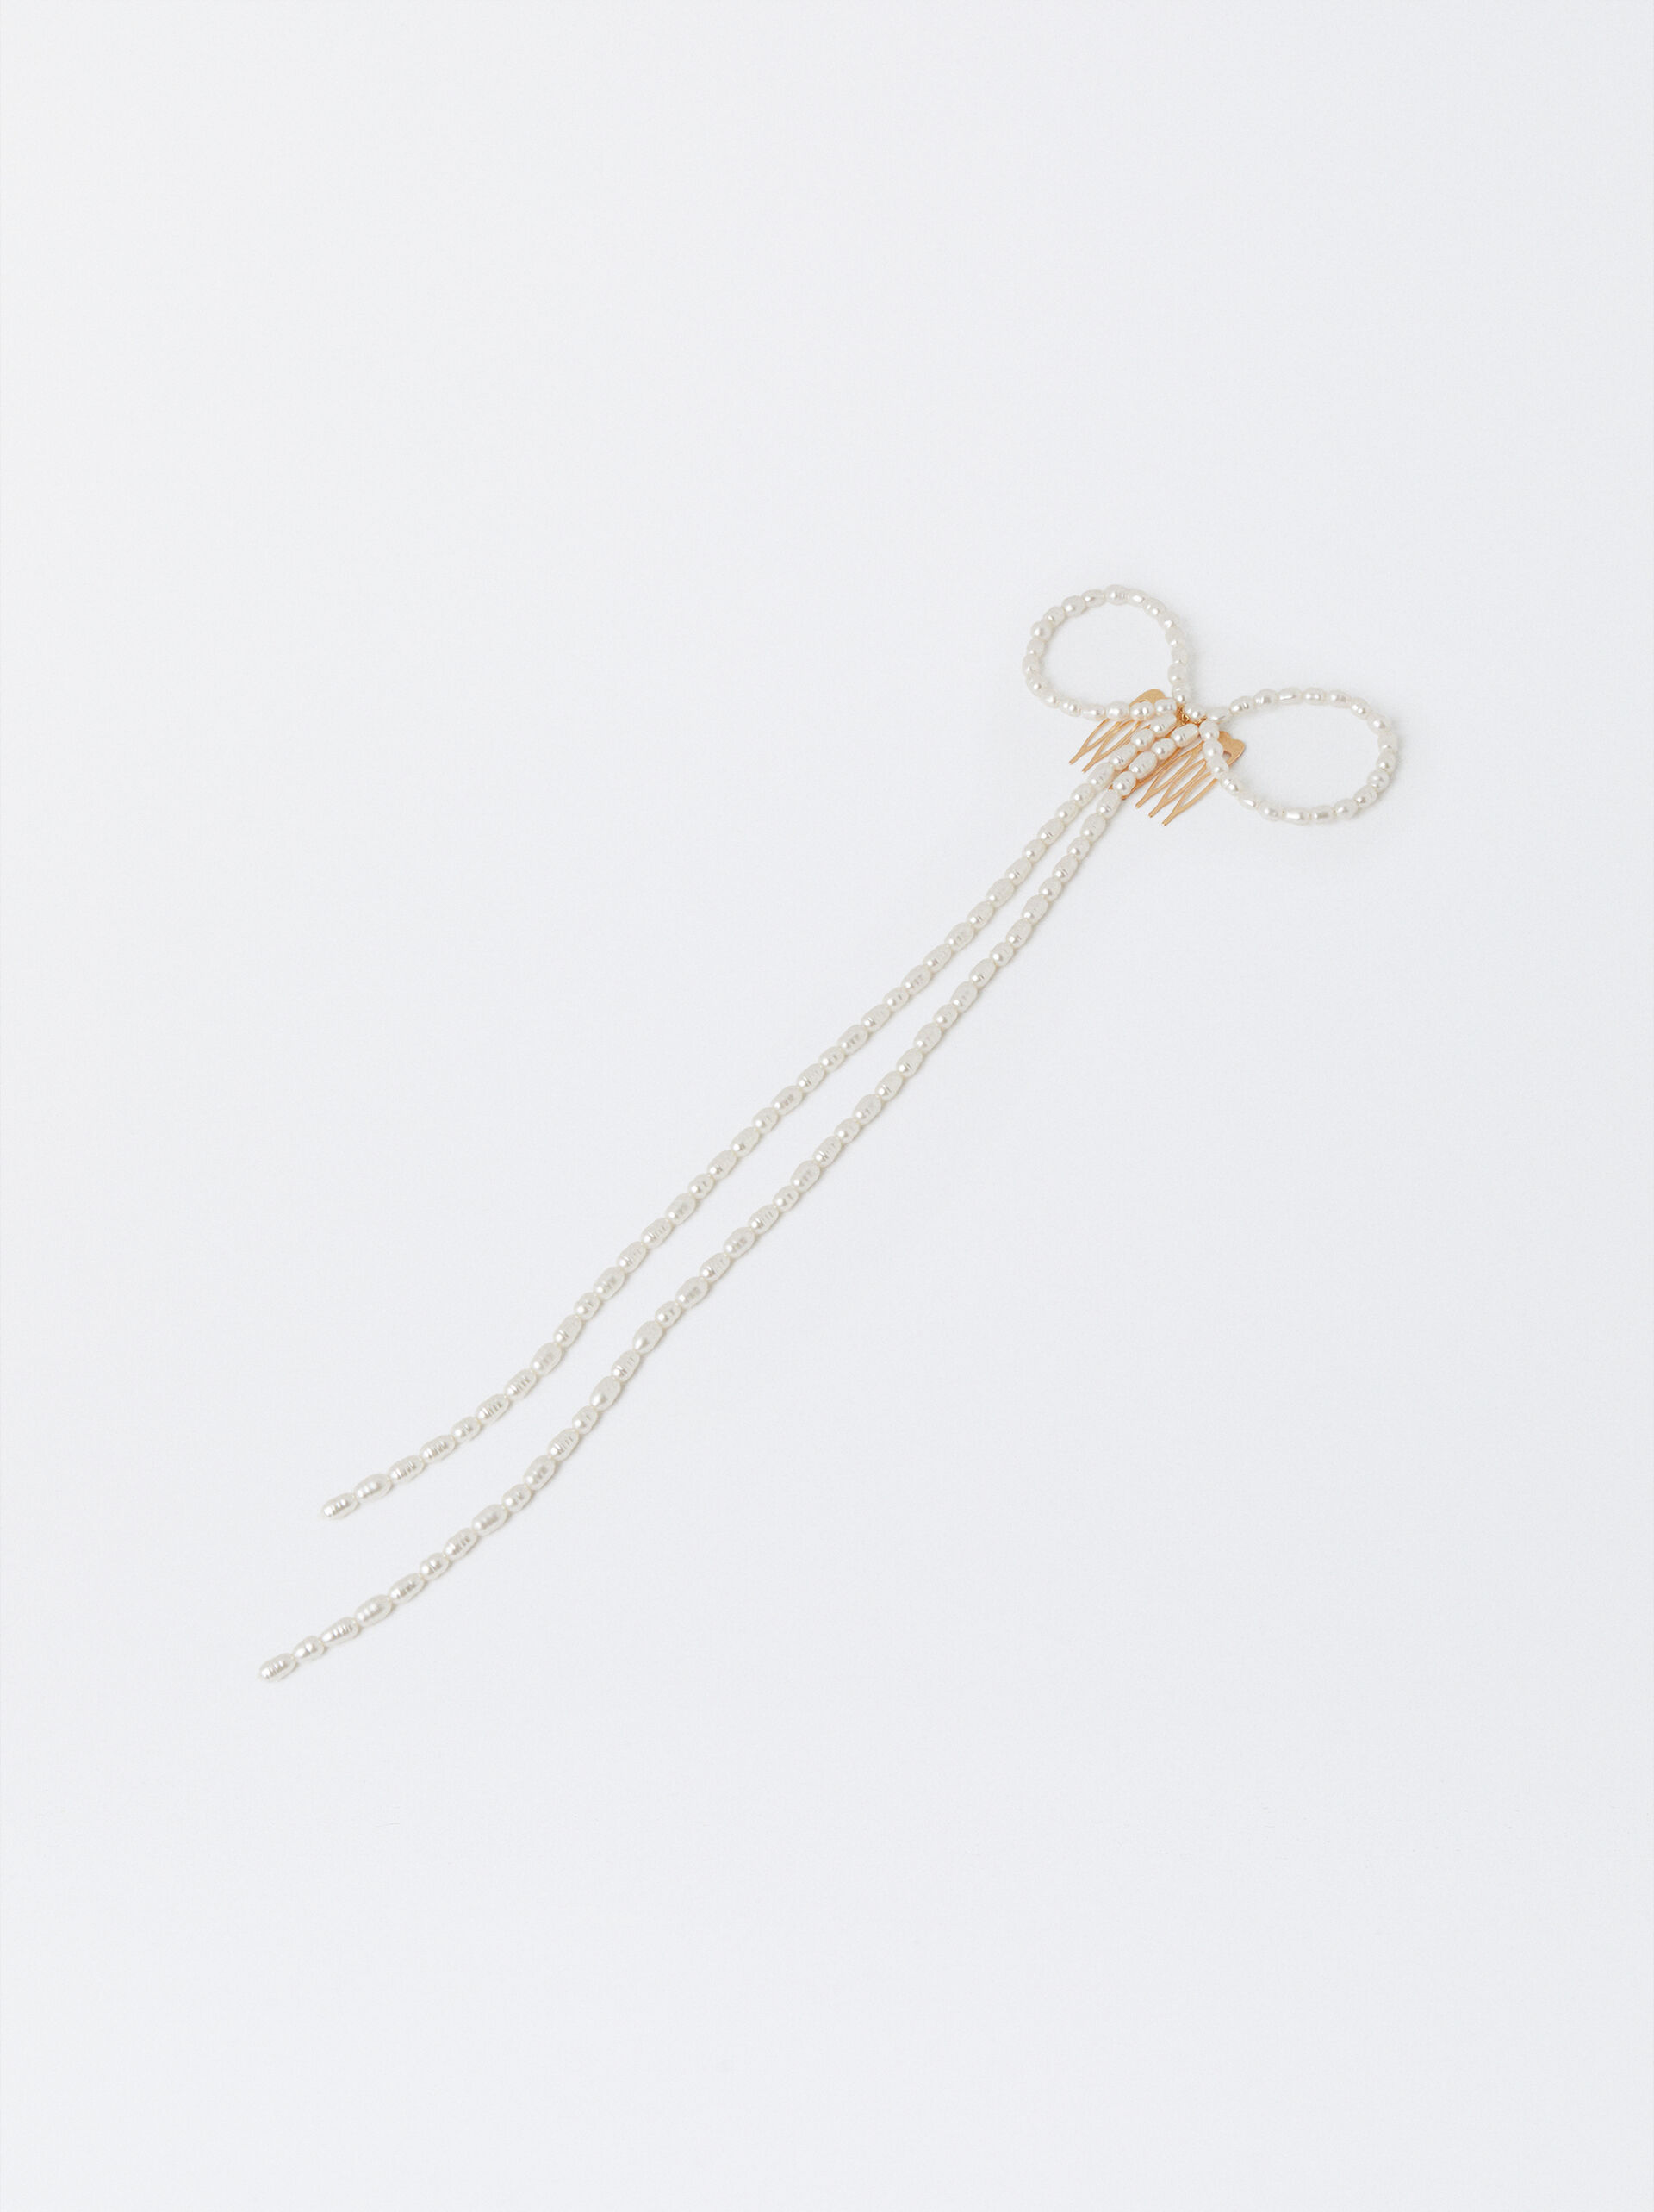 Hair Comb With Pearls image number 1.0